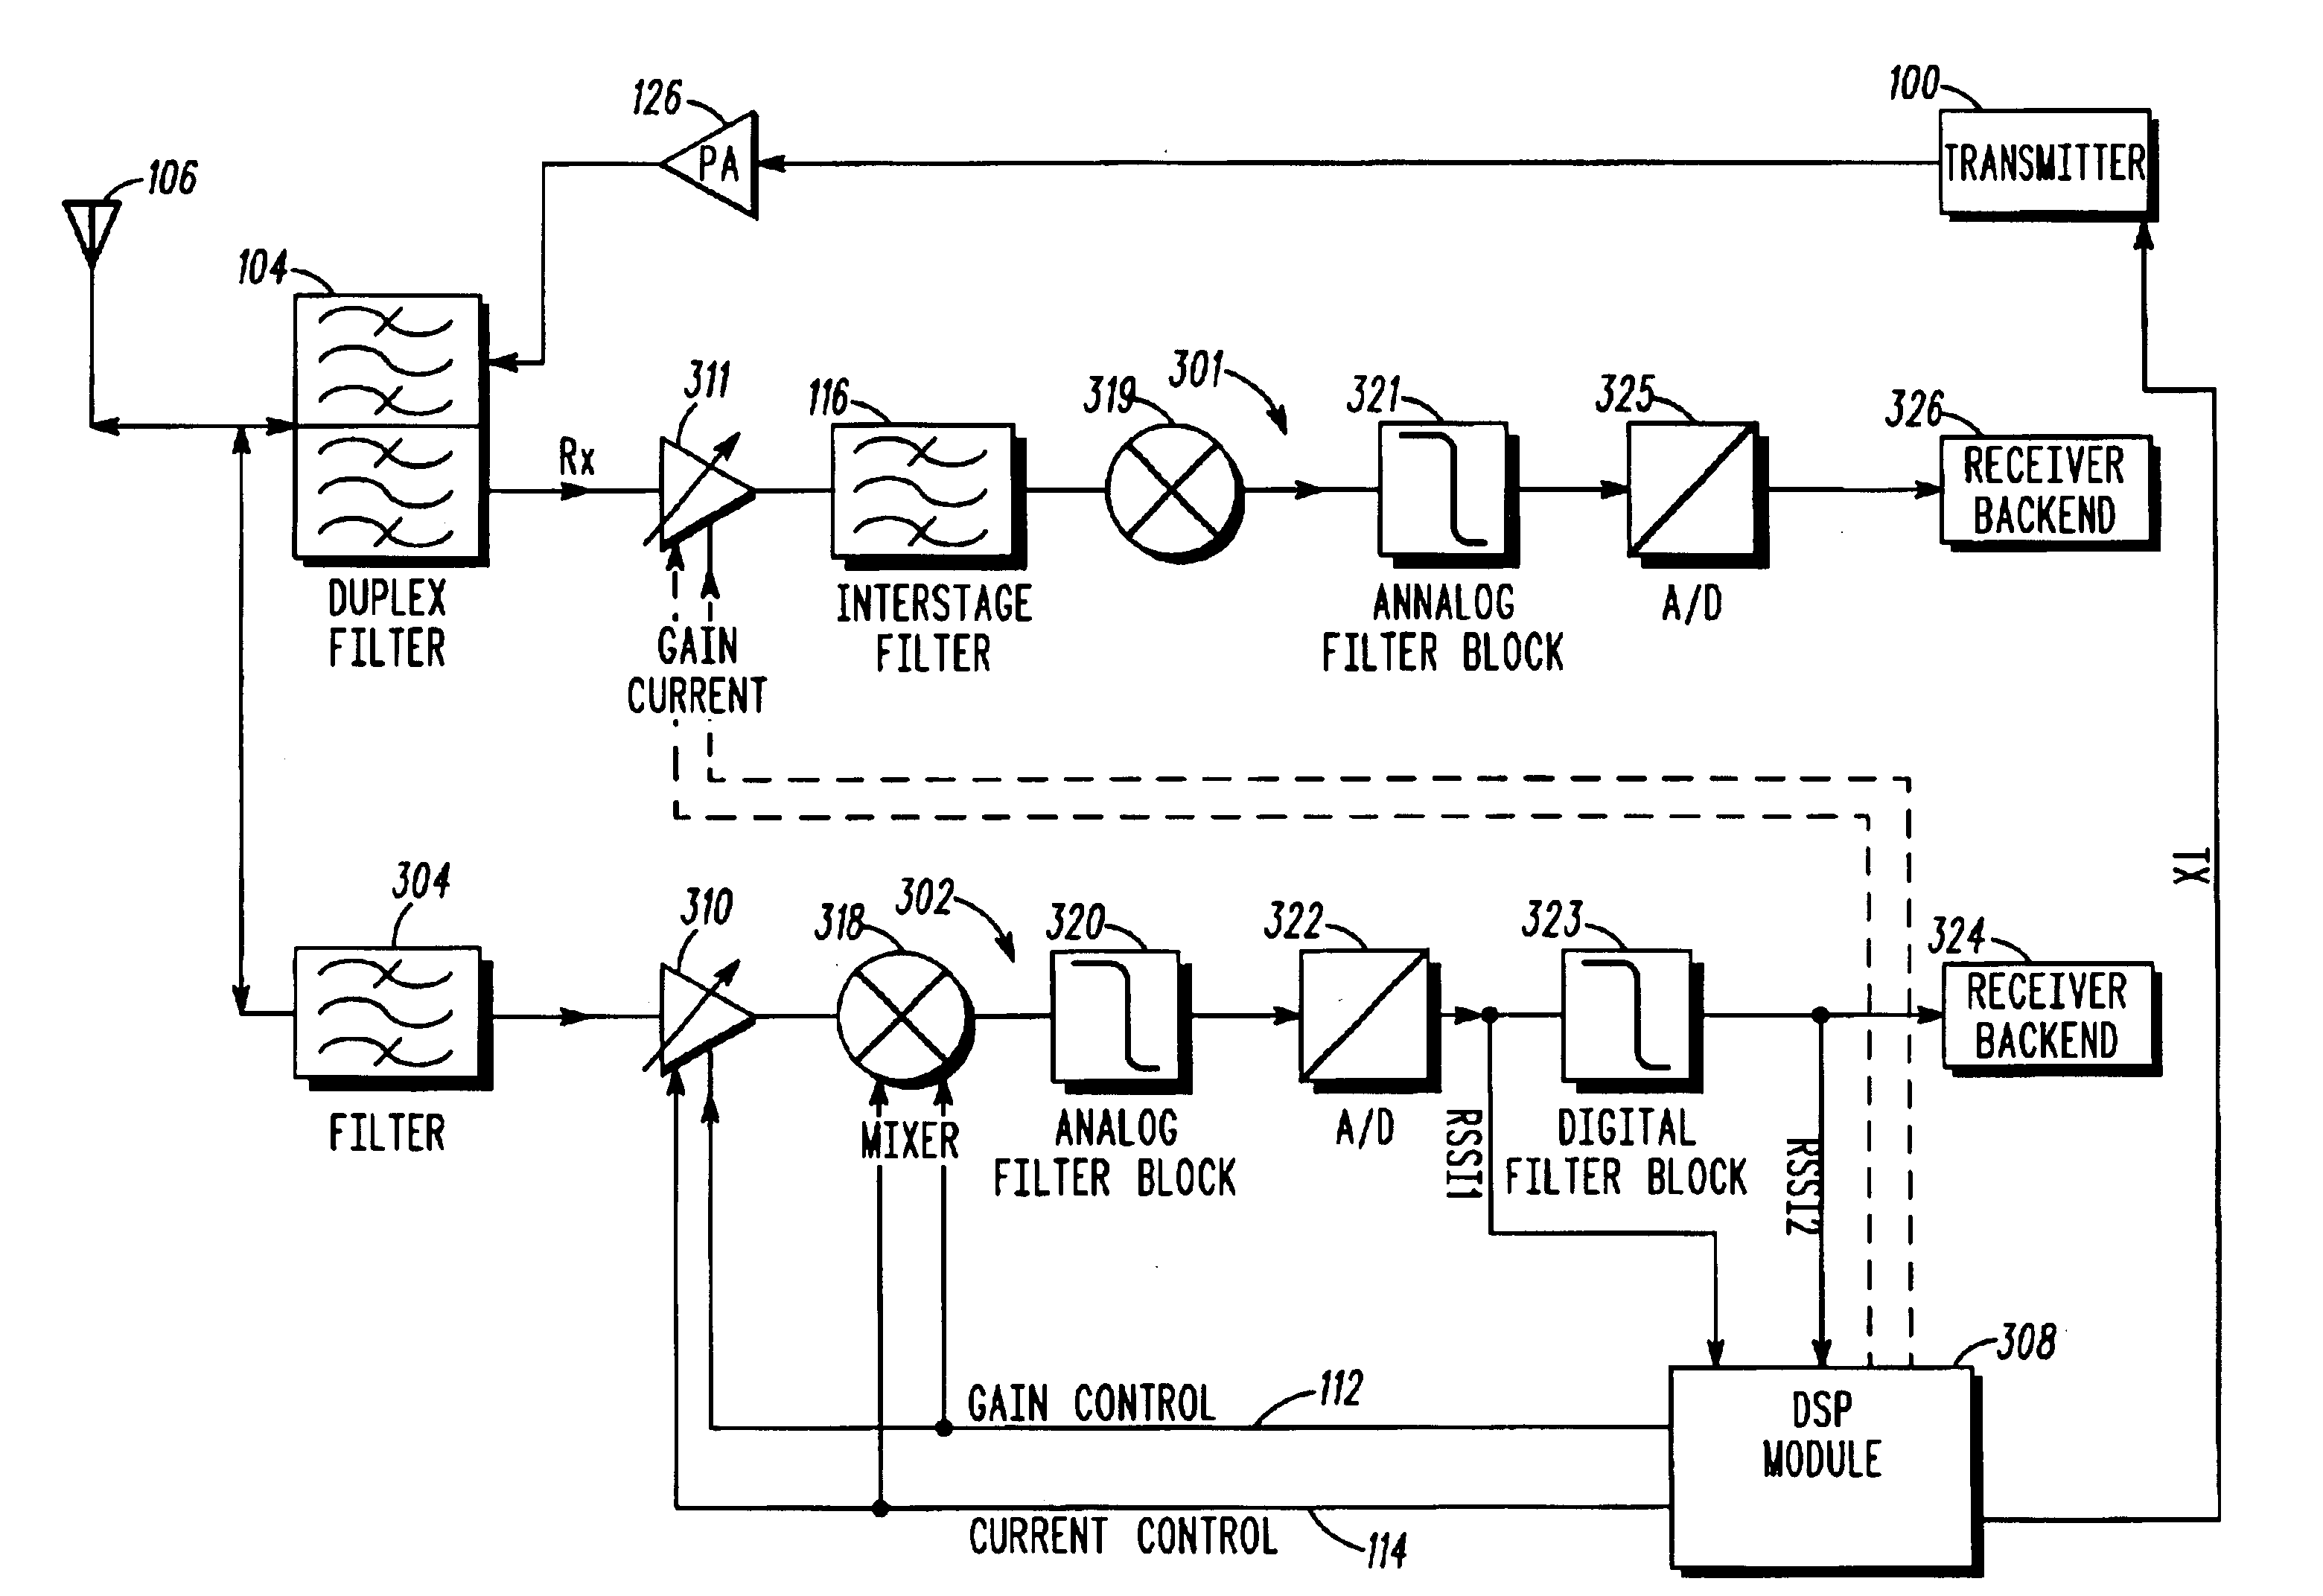 Reduced crossmodulation operation of a multimode communication device